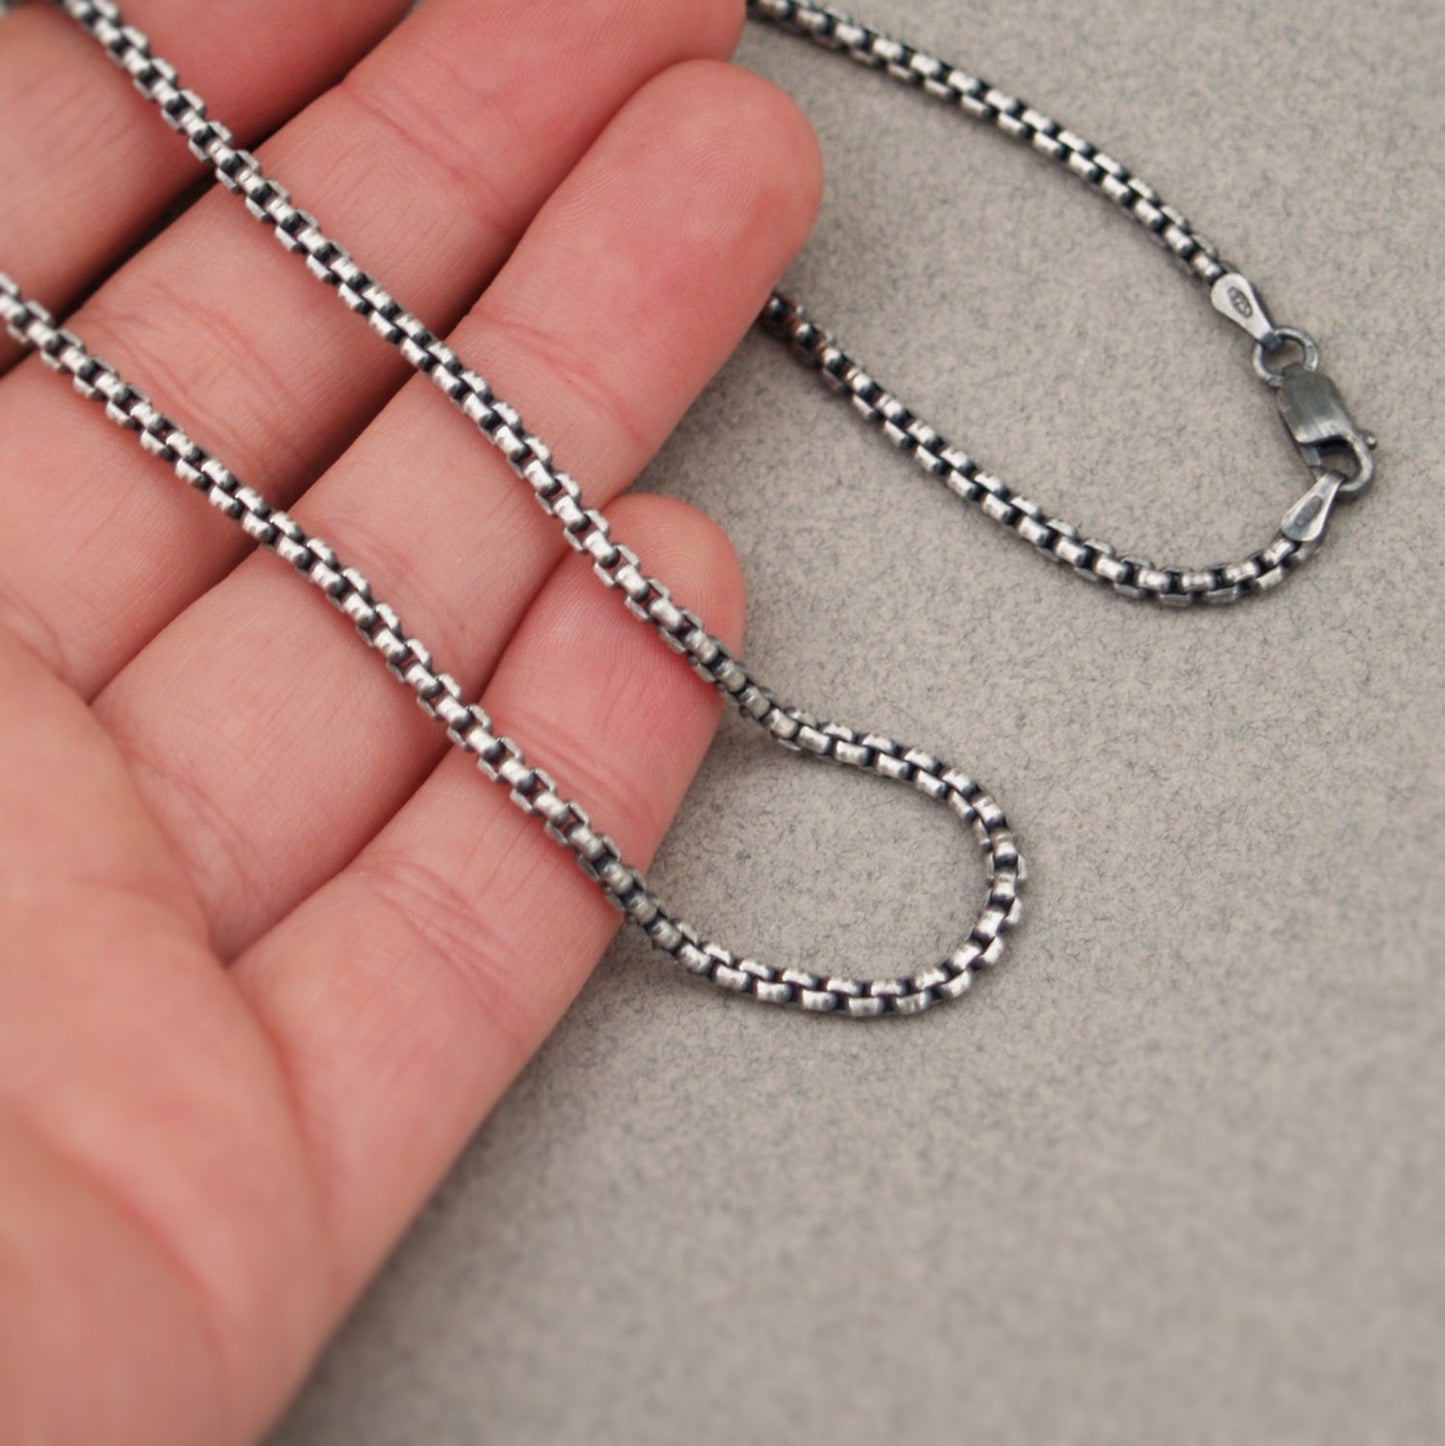 Oxidised or polished solid silver 2.5mm wide box belcher chain